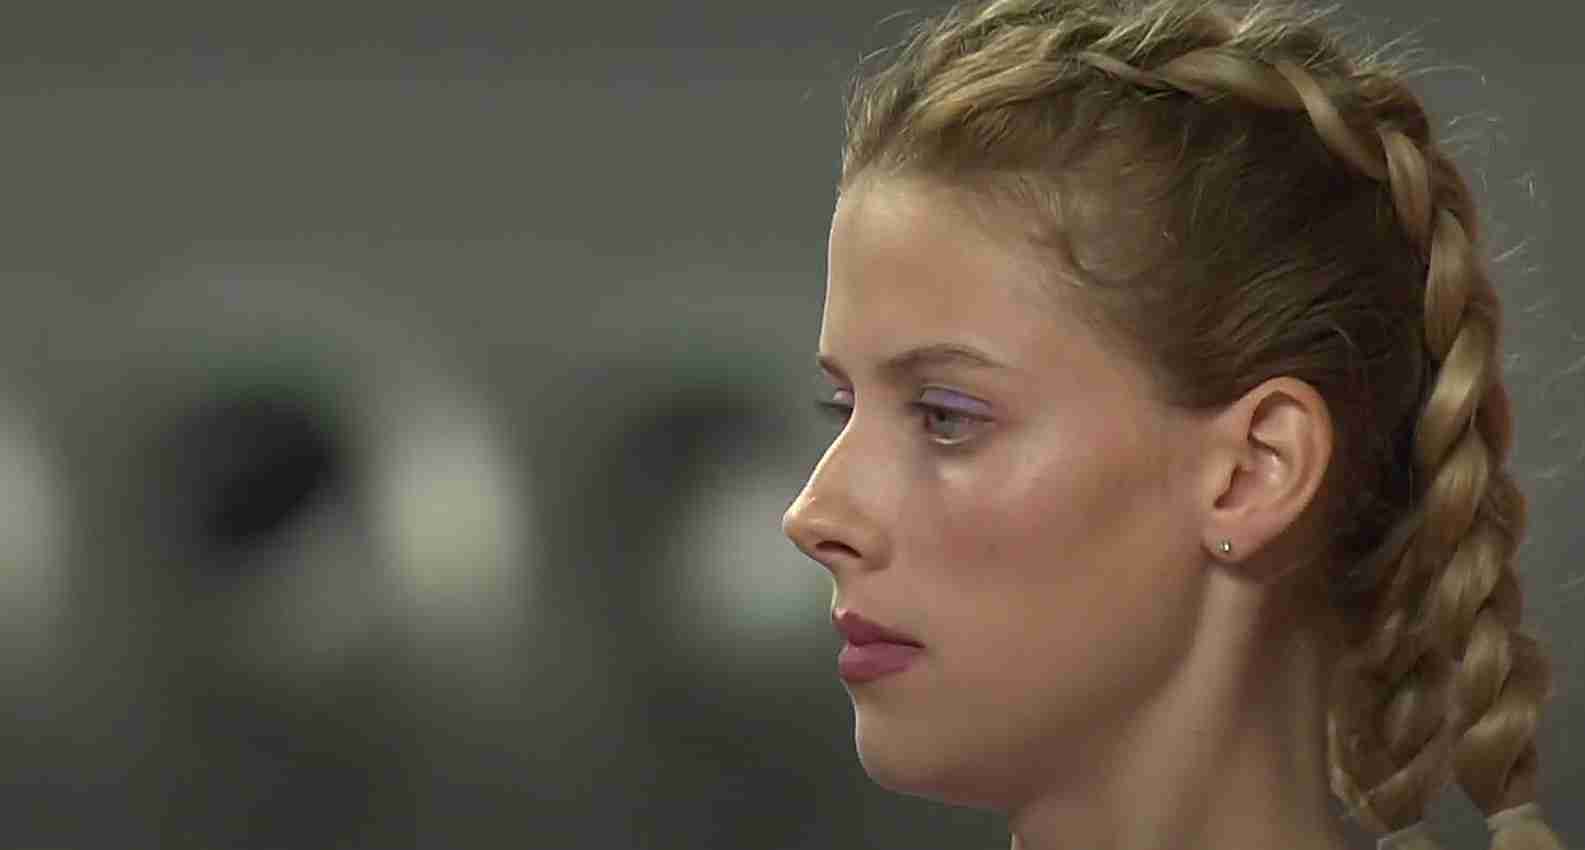 Watch Video: Mahuchikh Soars Over 2.06m In Banska Bystrica To Go 3rd All-Time